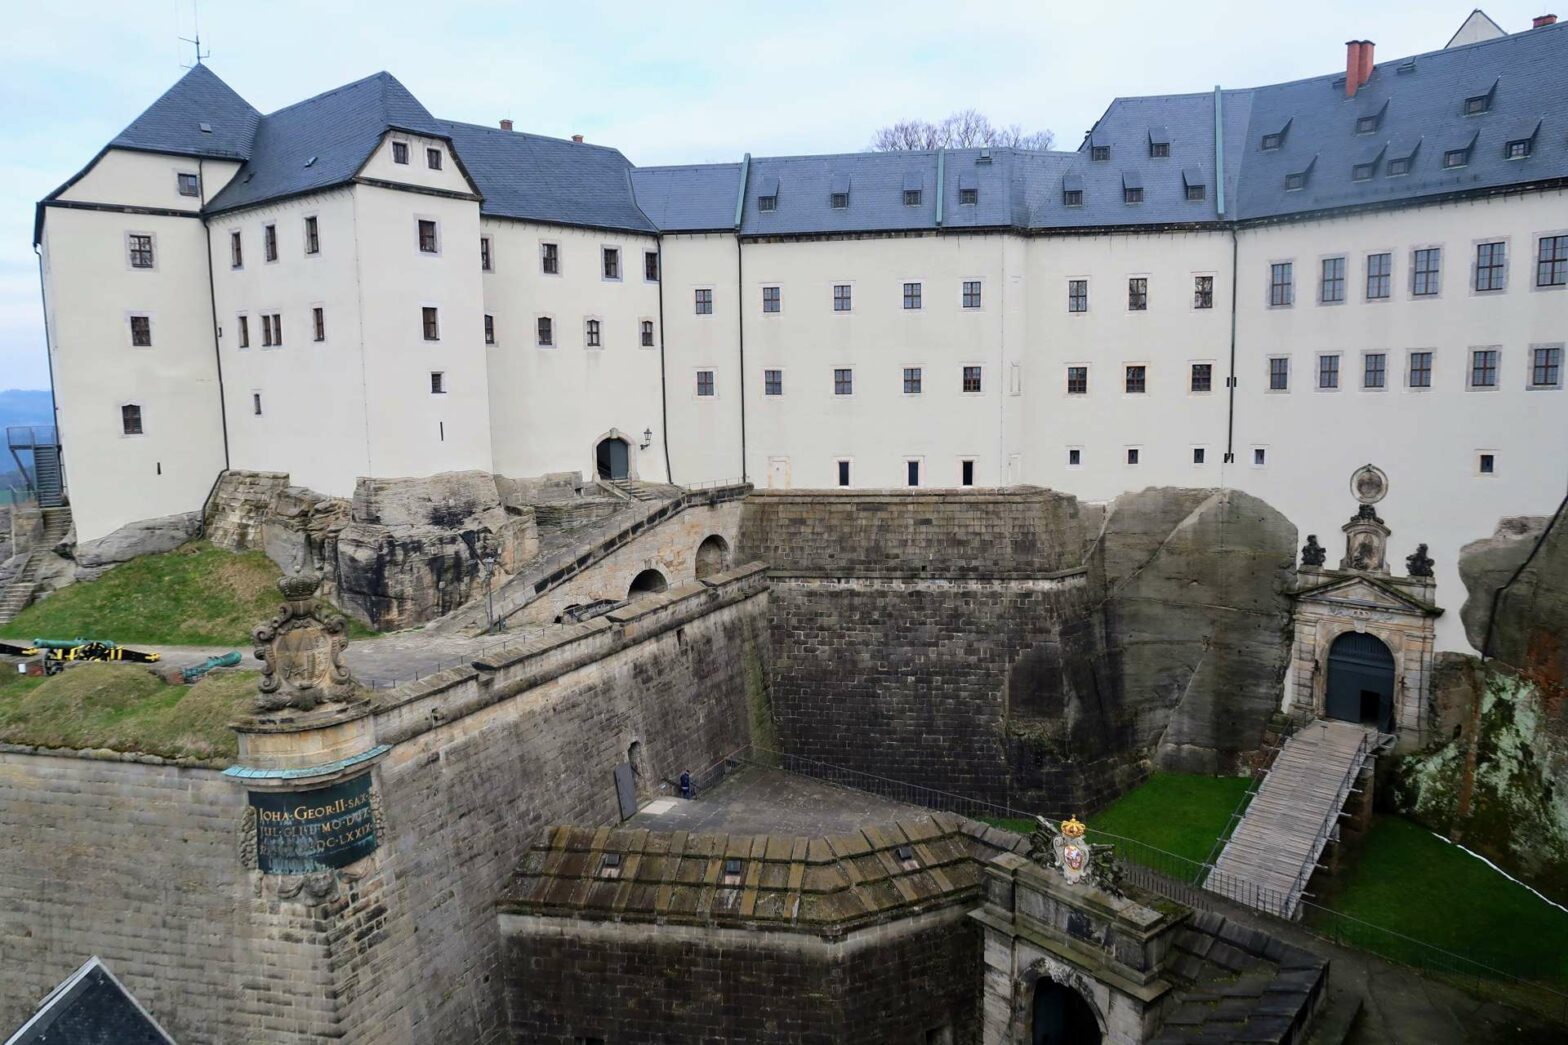 The imposing entrance of Königstein Fortress